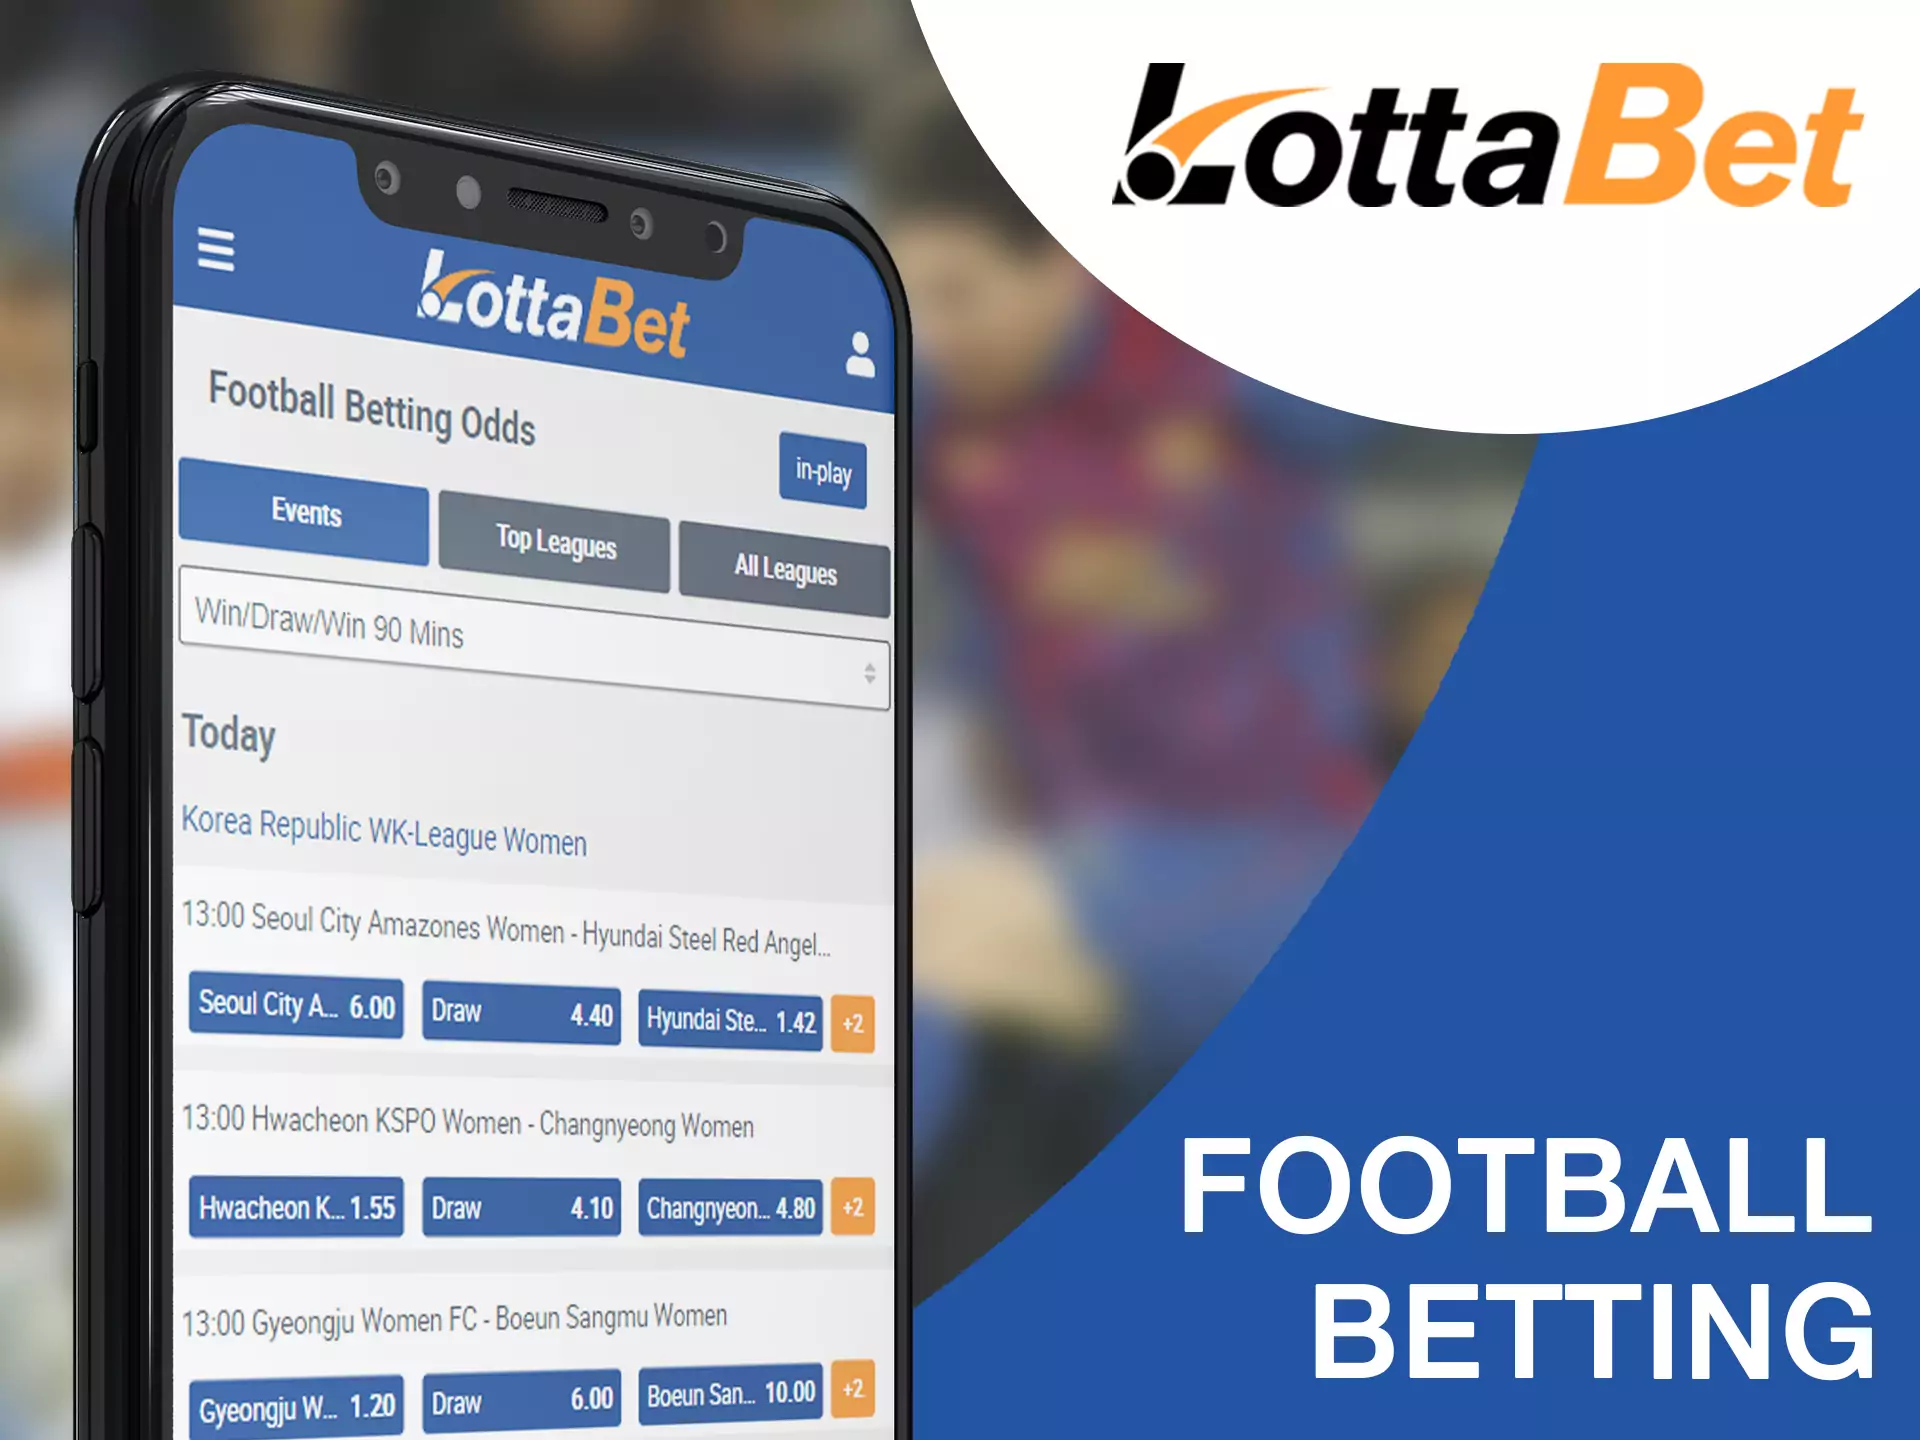 LottaBet app is the best for football betting.